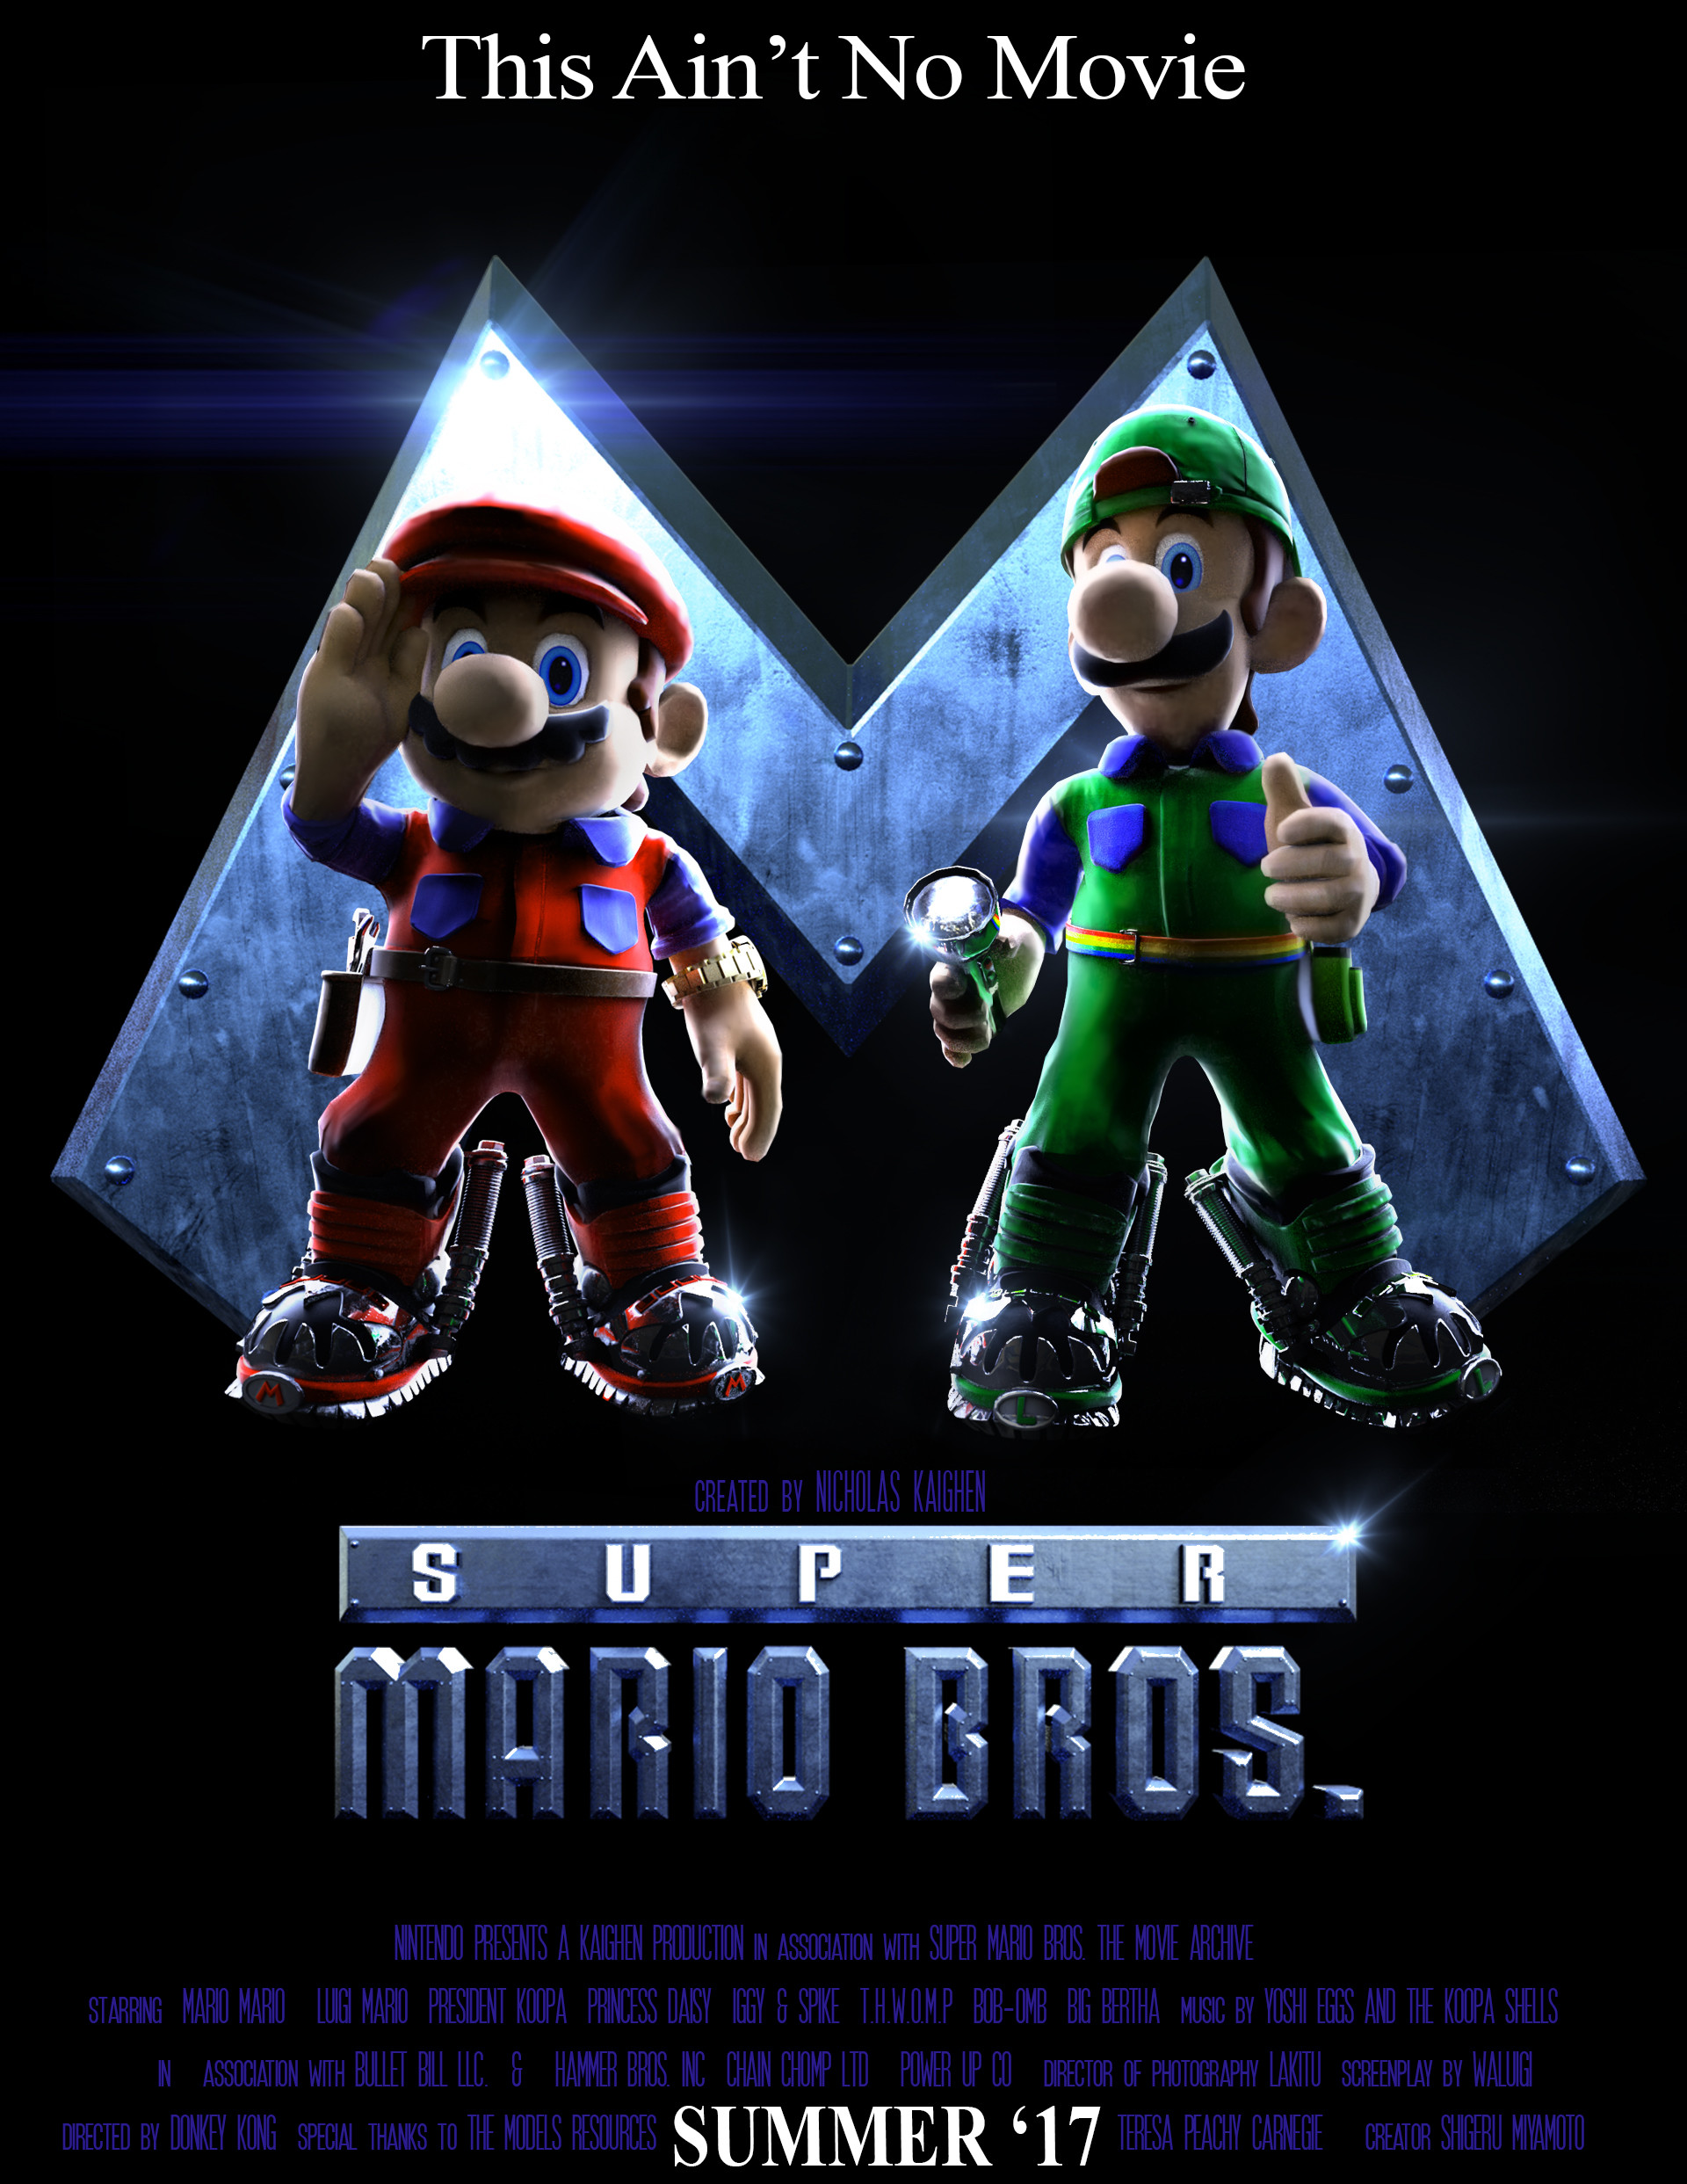 What Is A Website You Can Watch The Super Mario Bros Movie Without Downloading Anything